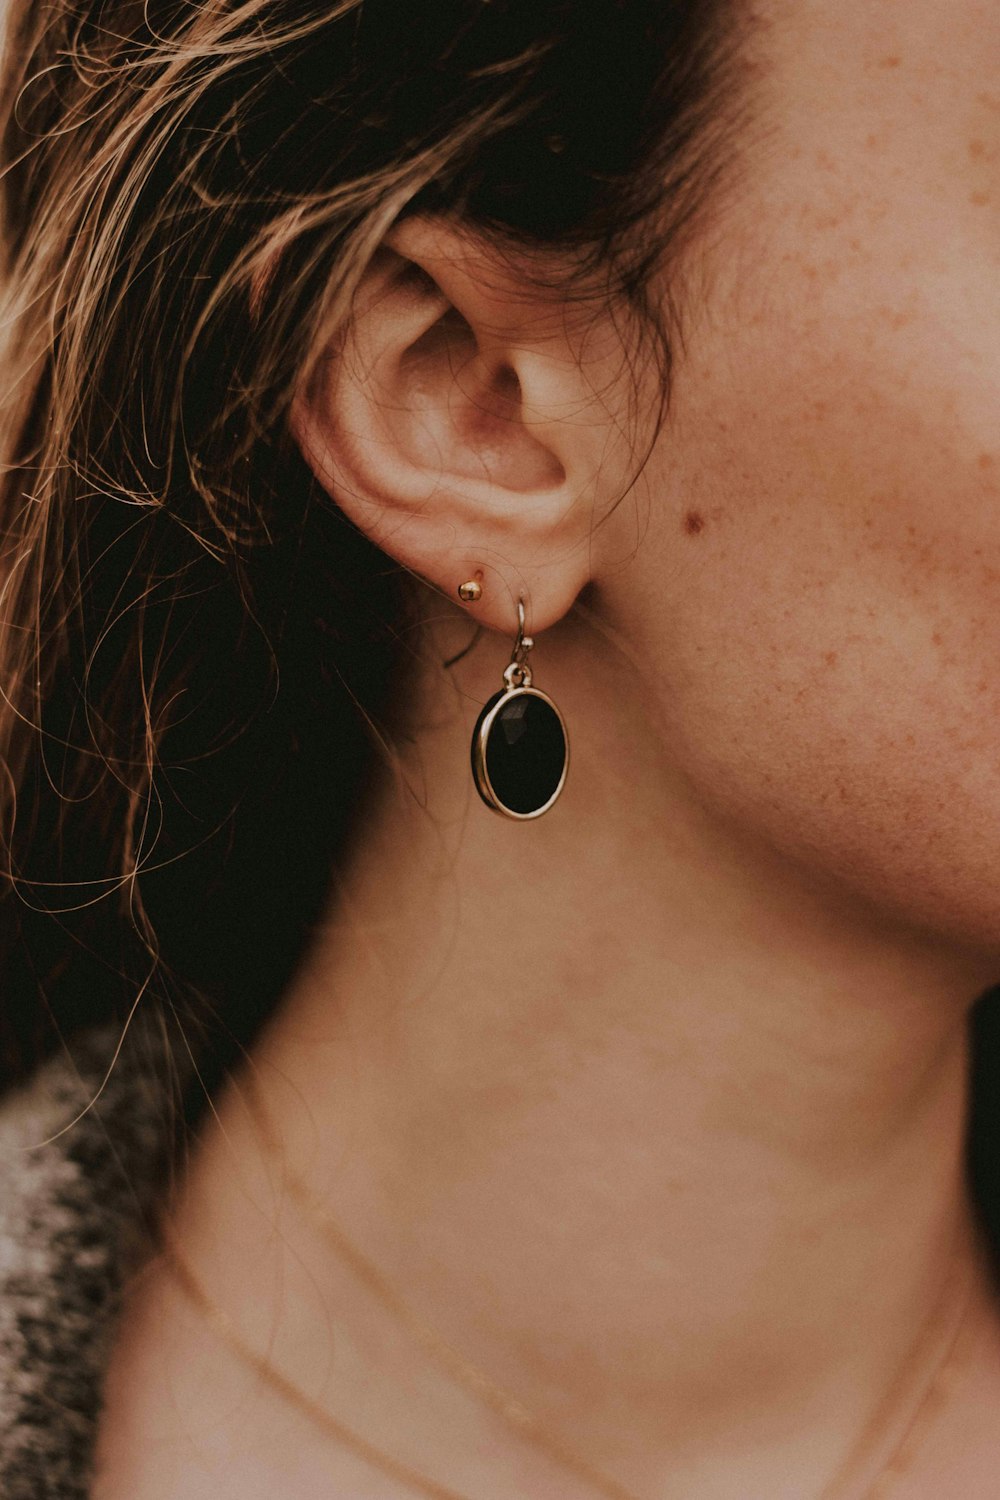 999+ Earrings Pictures | Download Free Images on Unsplash